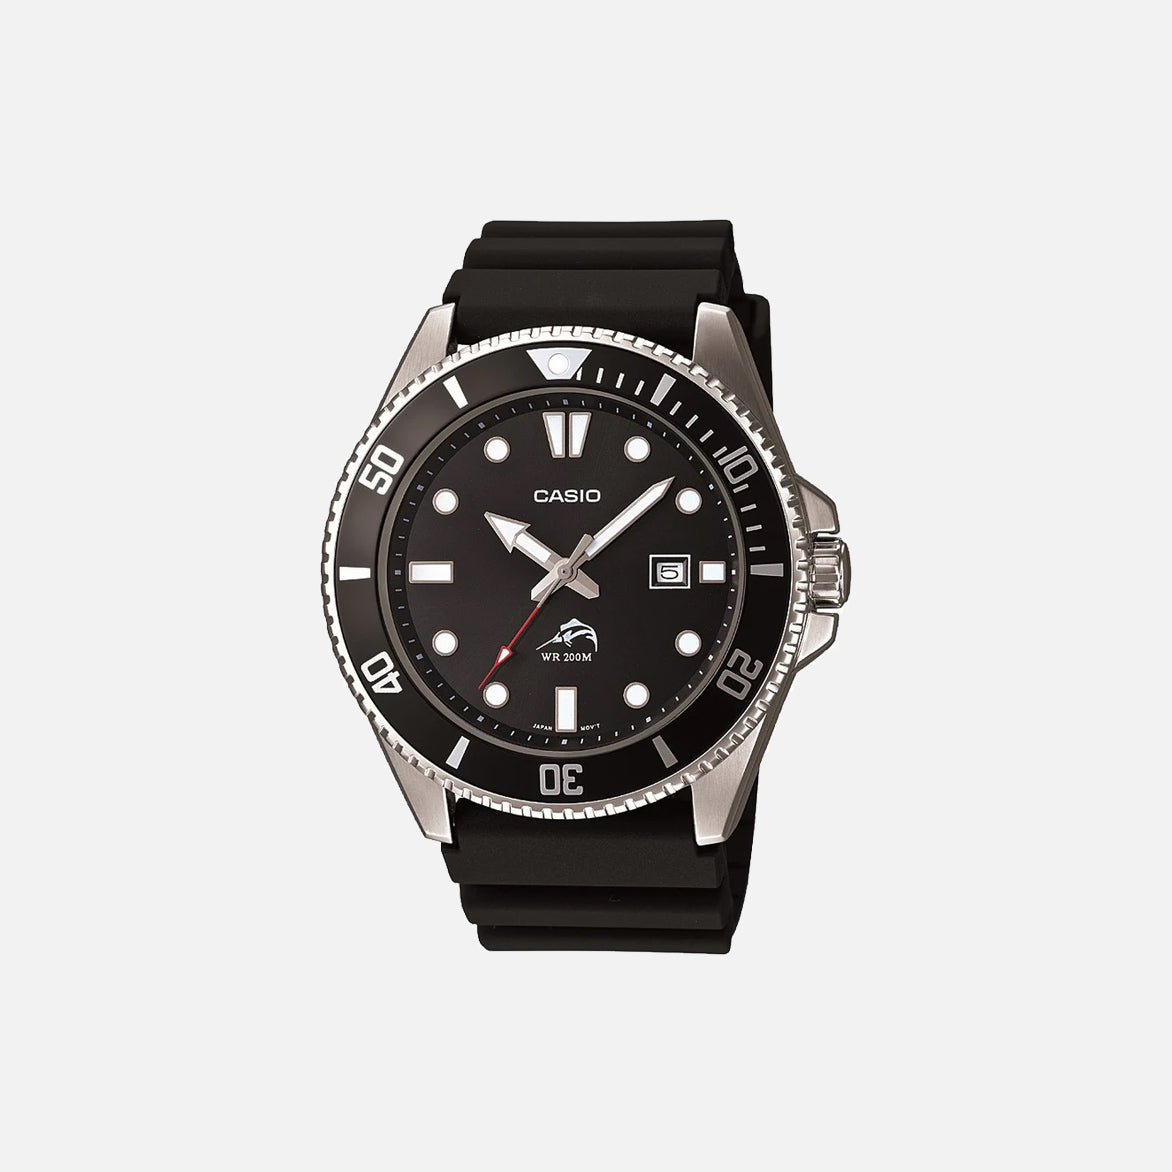 MDV106-1A, Black and Silver Men's Analog Watch